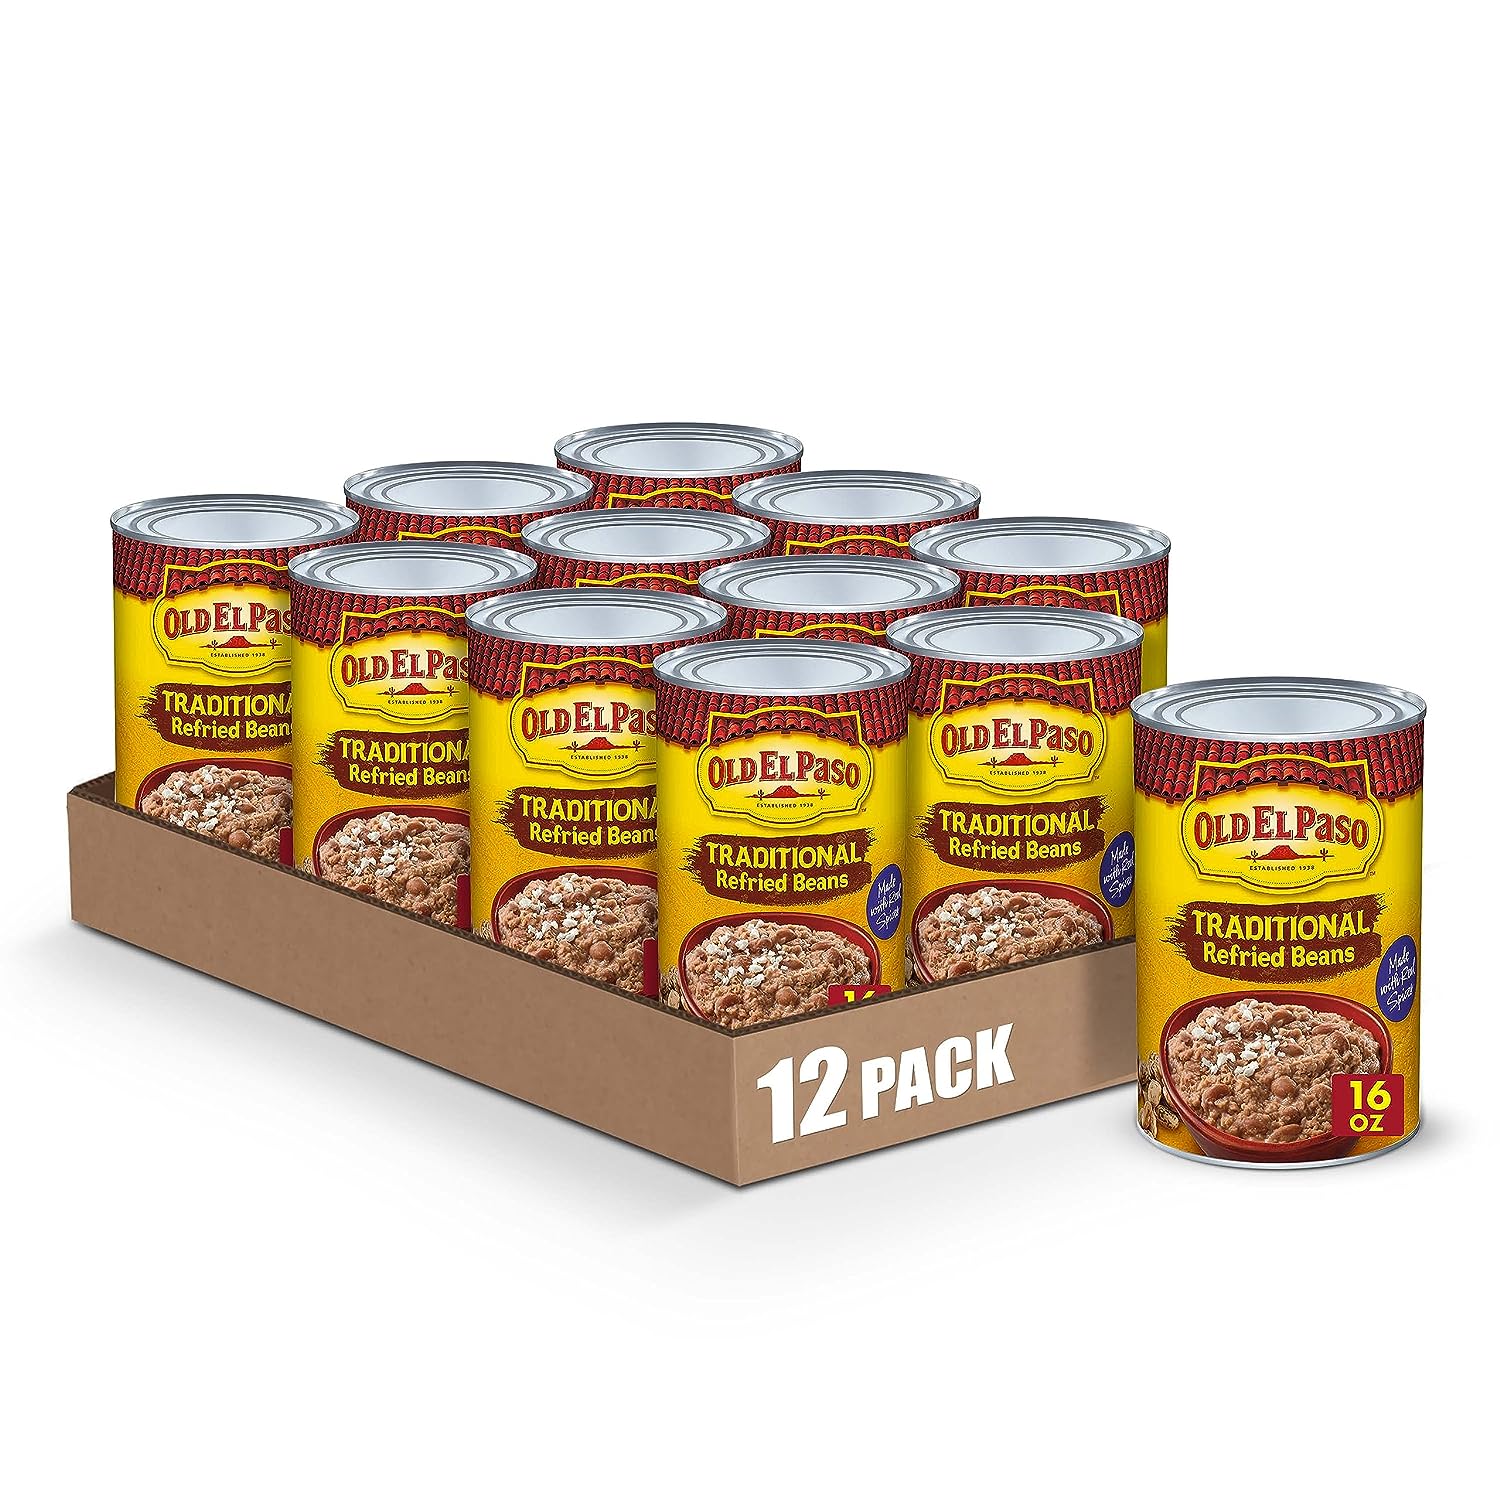 Old El Paso Traditional Canned Refried Beans, 16 oz. (Pack of 12)